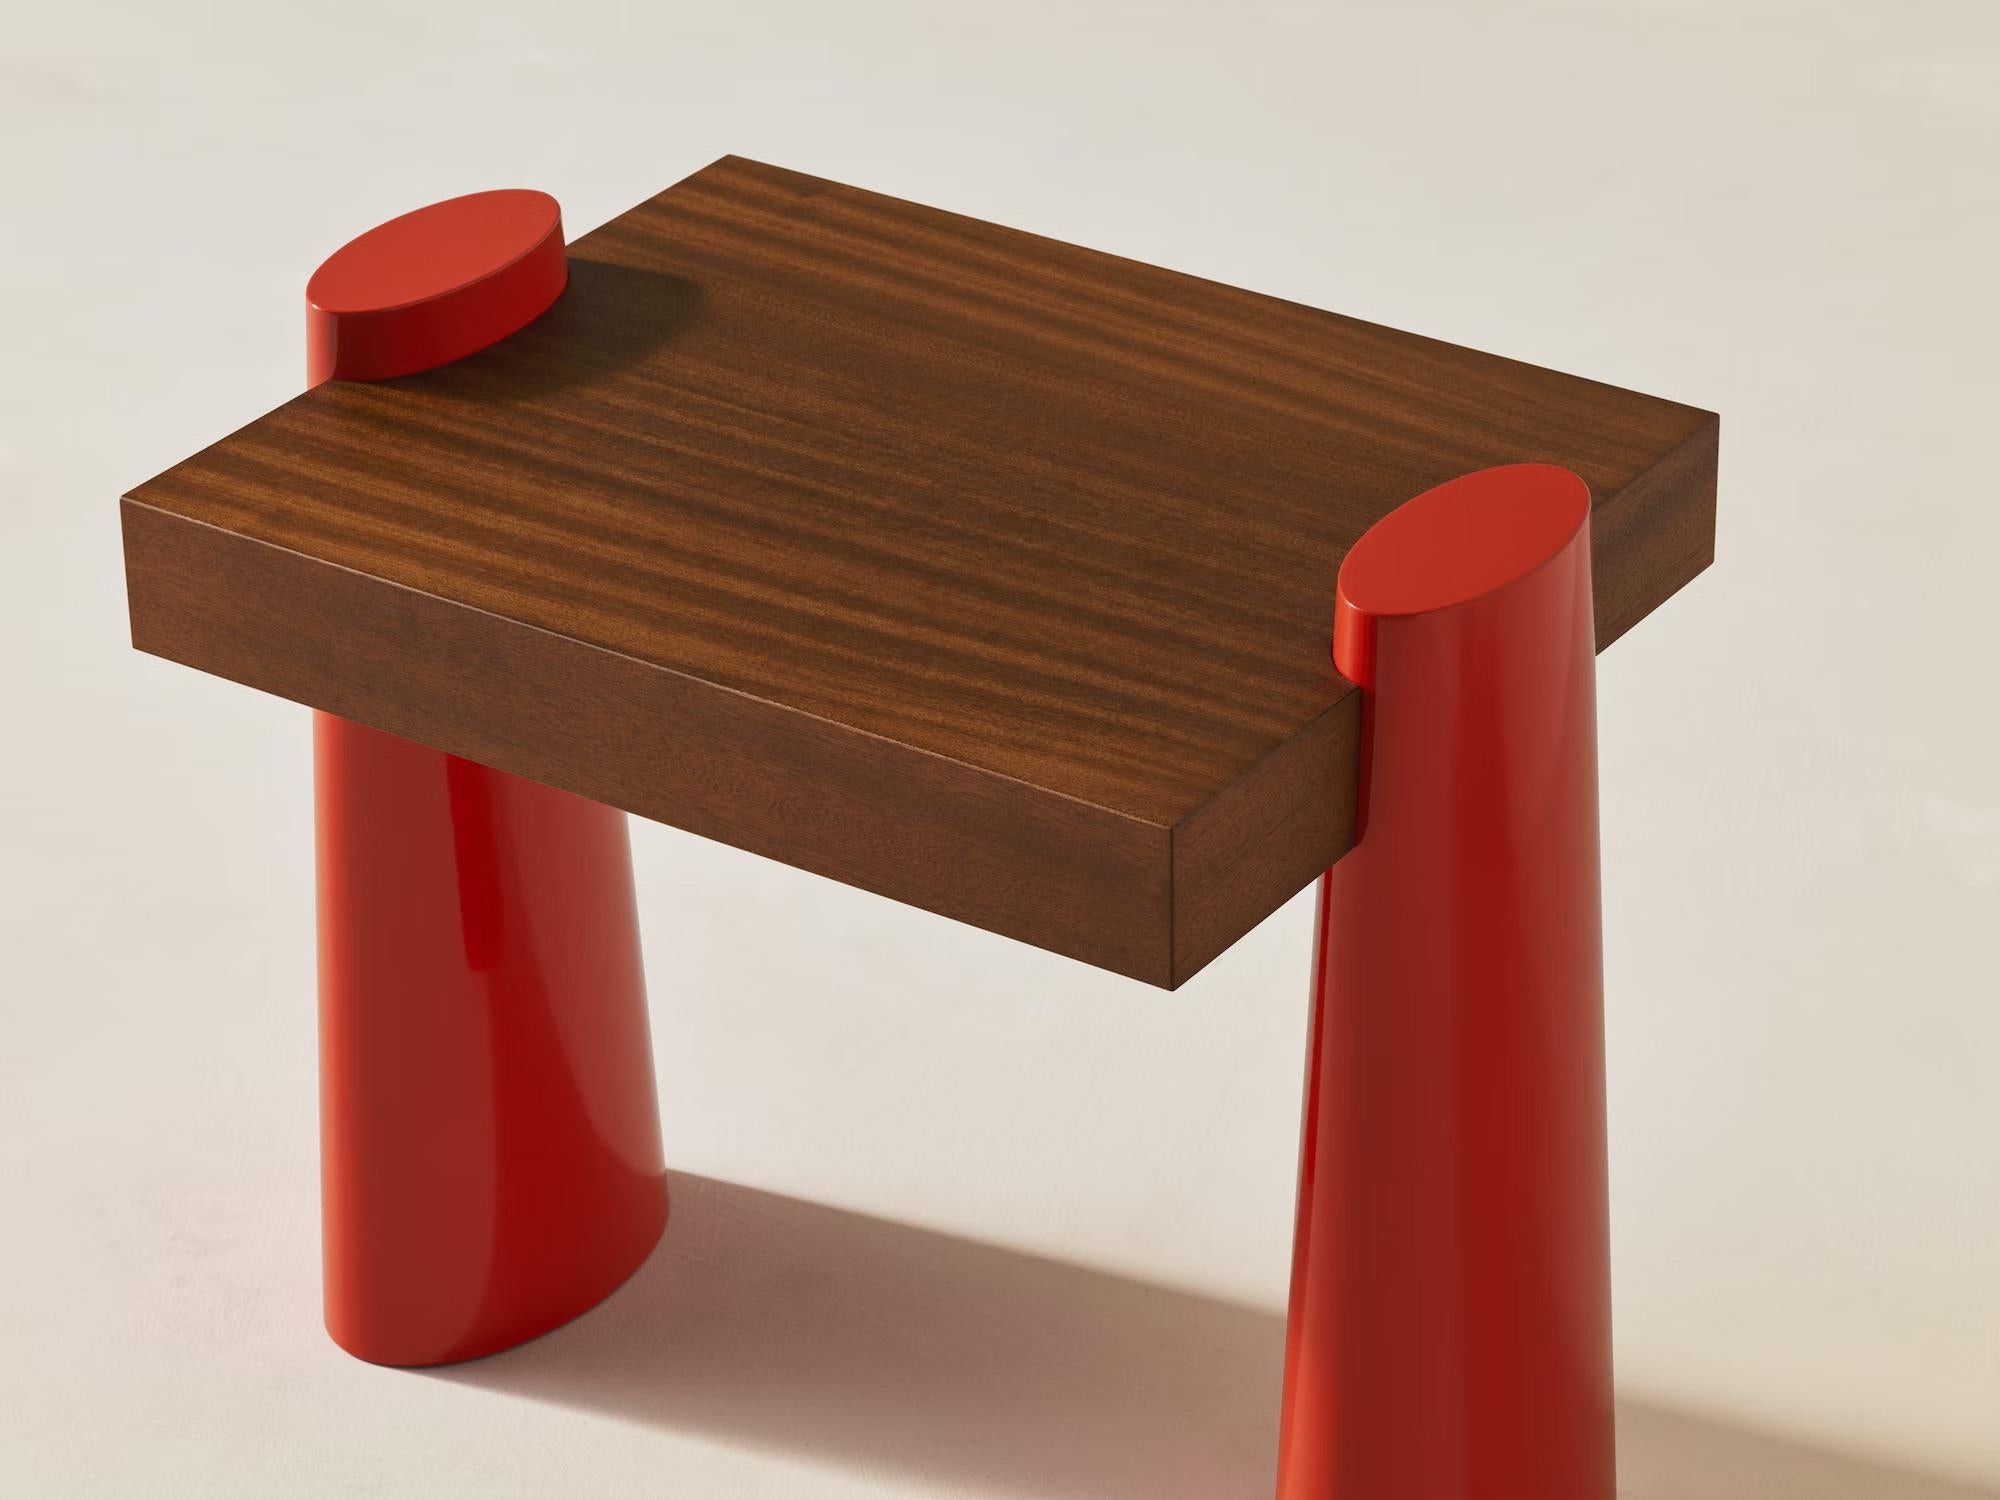 Classic design meets peppy color in the Baby E Side Table. Its rounded, flame-red legs (inspired by baby elephants) offset the rich mahogany seat beautifully, adding a pop of fun to any room.

Additional information:
Material: Mahogany Classic